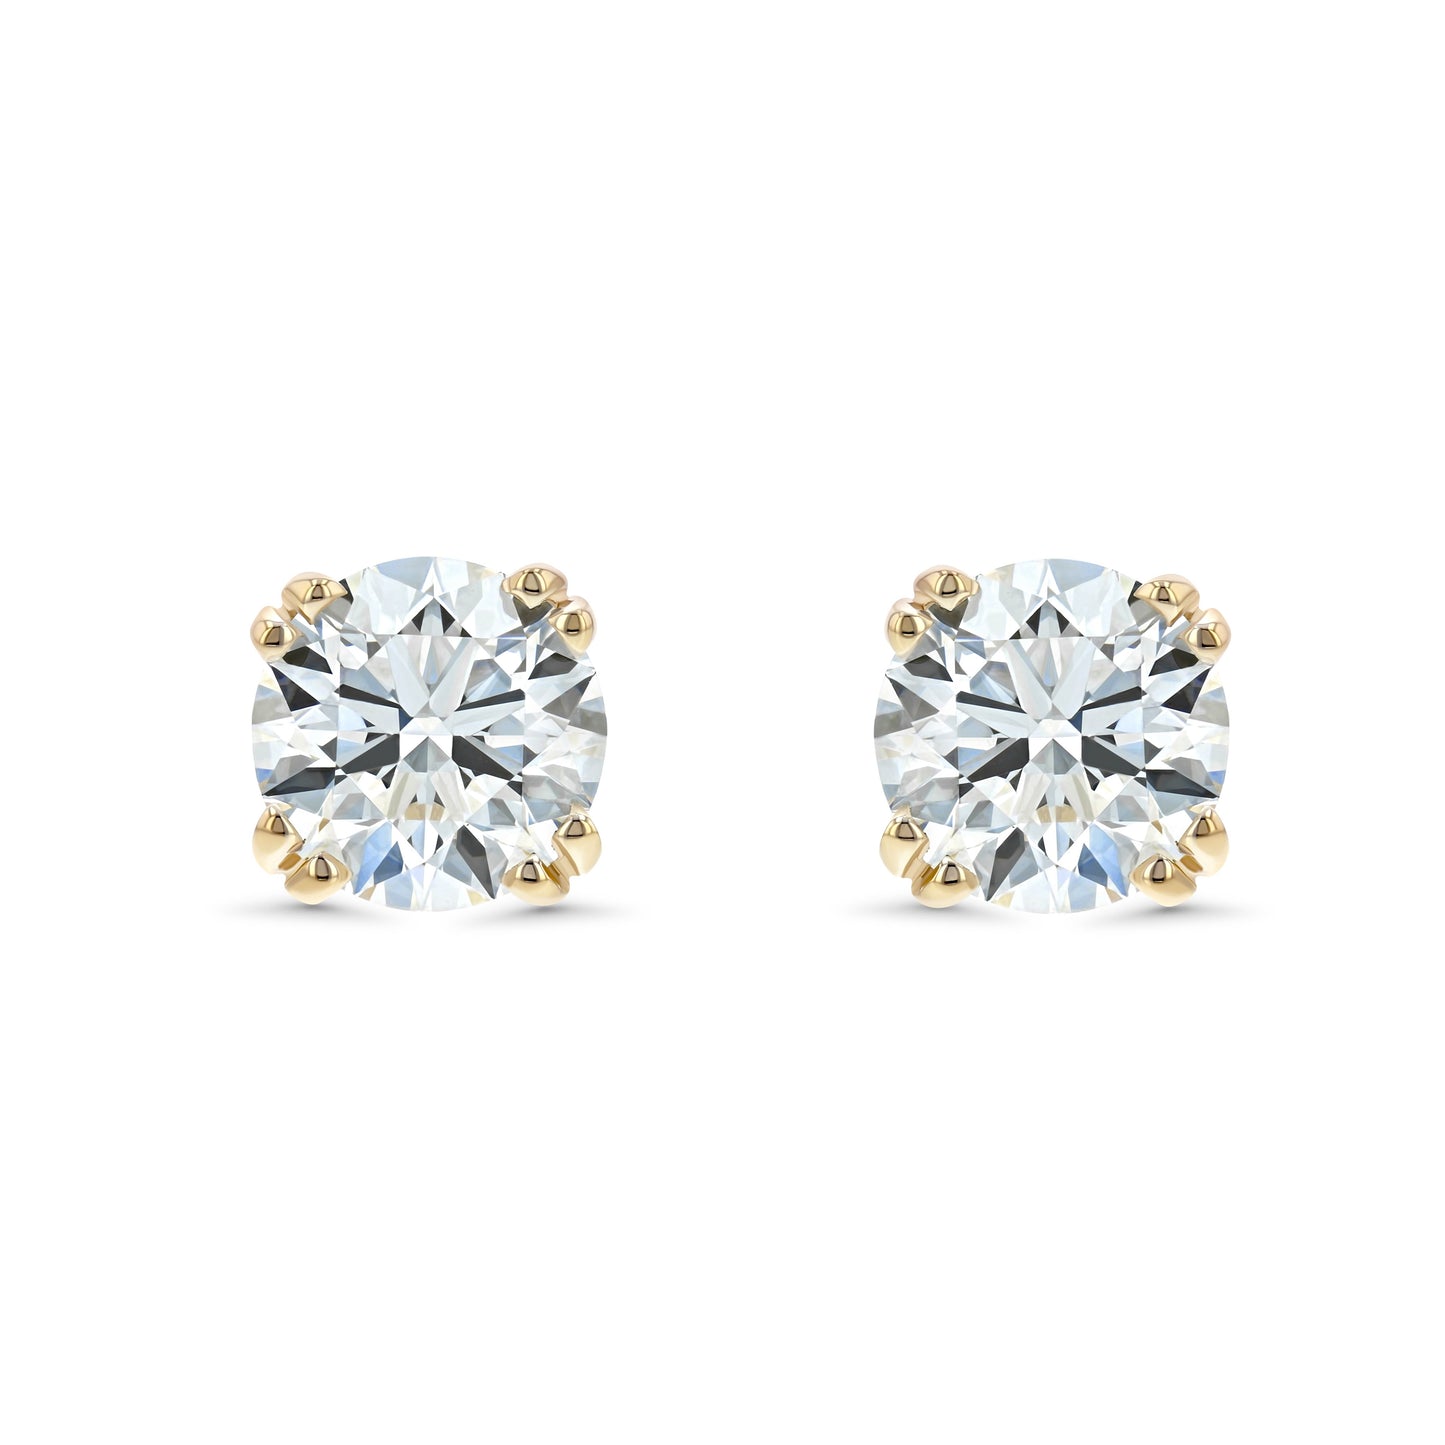 14k Yellow Gold Double Prong Round Diamond Stud Earrings 1/2ctw (4.1mm Ea), M-n Color, Si2-si3 Clarity